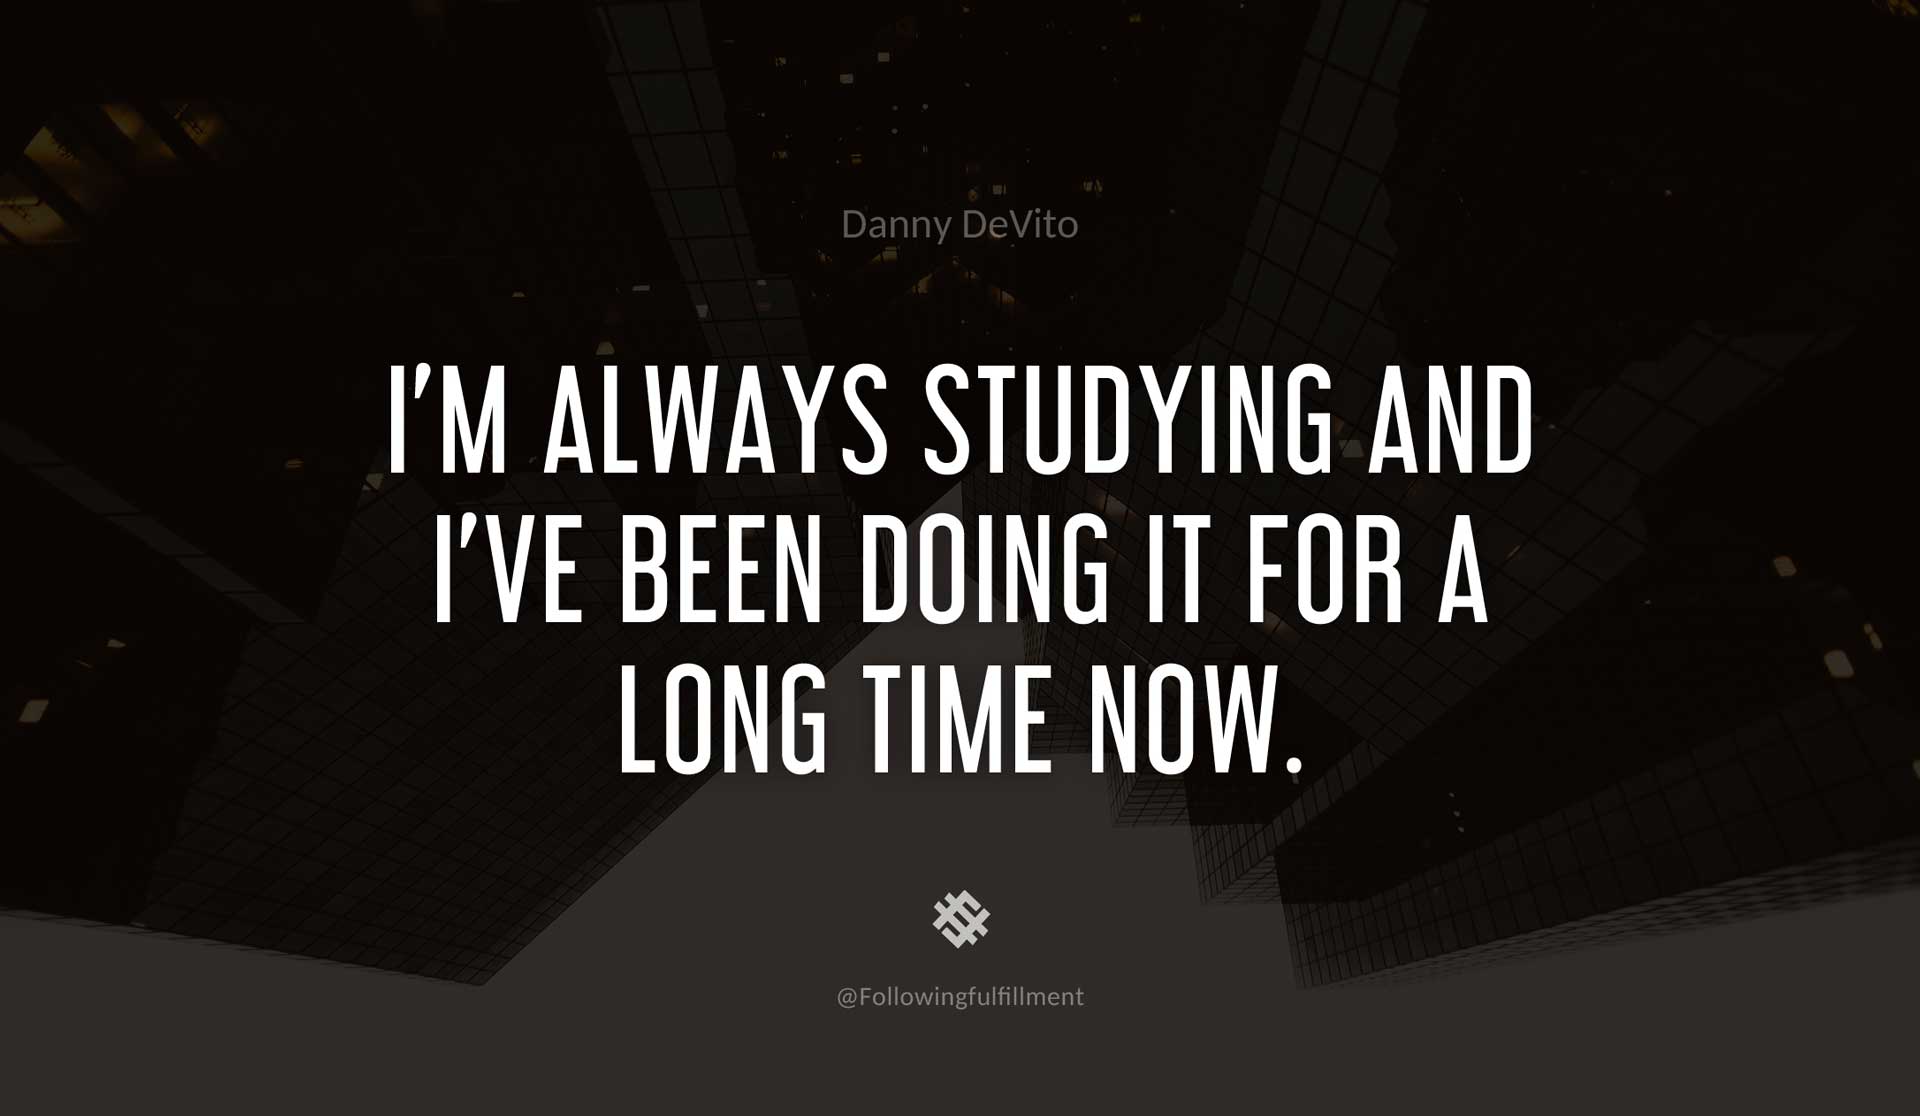 I'm-always-studying-and-I've-been-doing-it-for-a-long-time-now.-DANNY-DEVITO-Quote.jpg